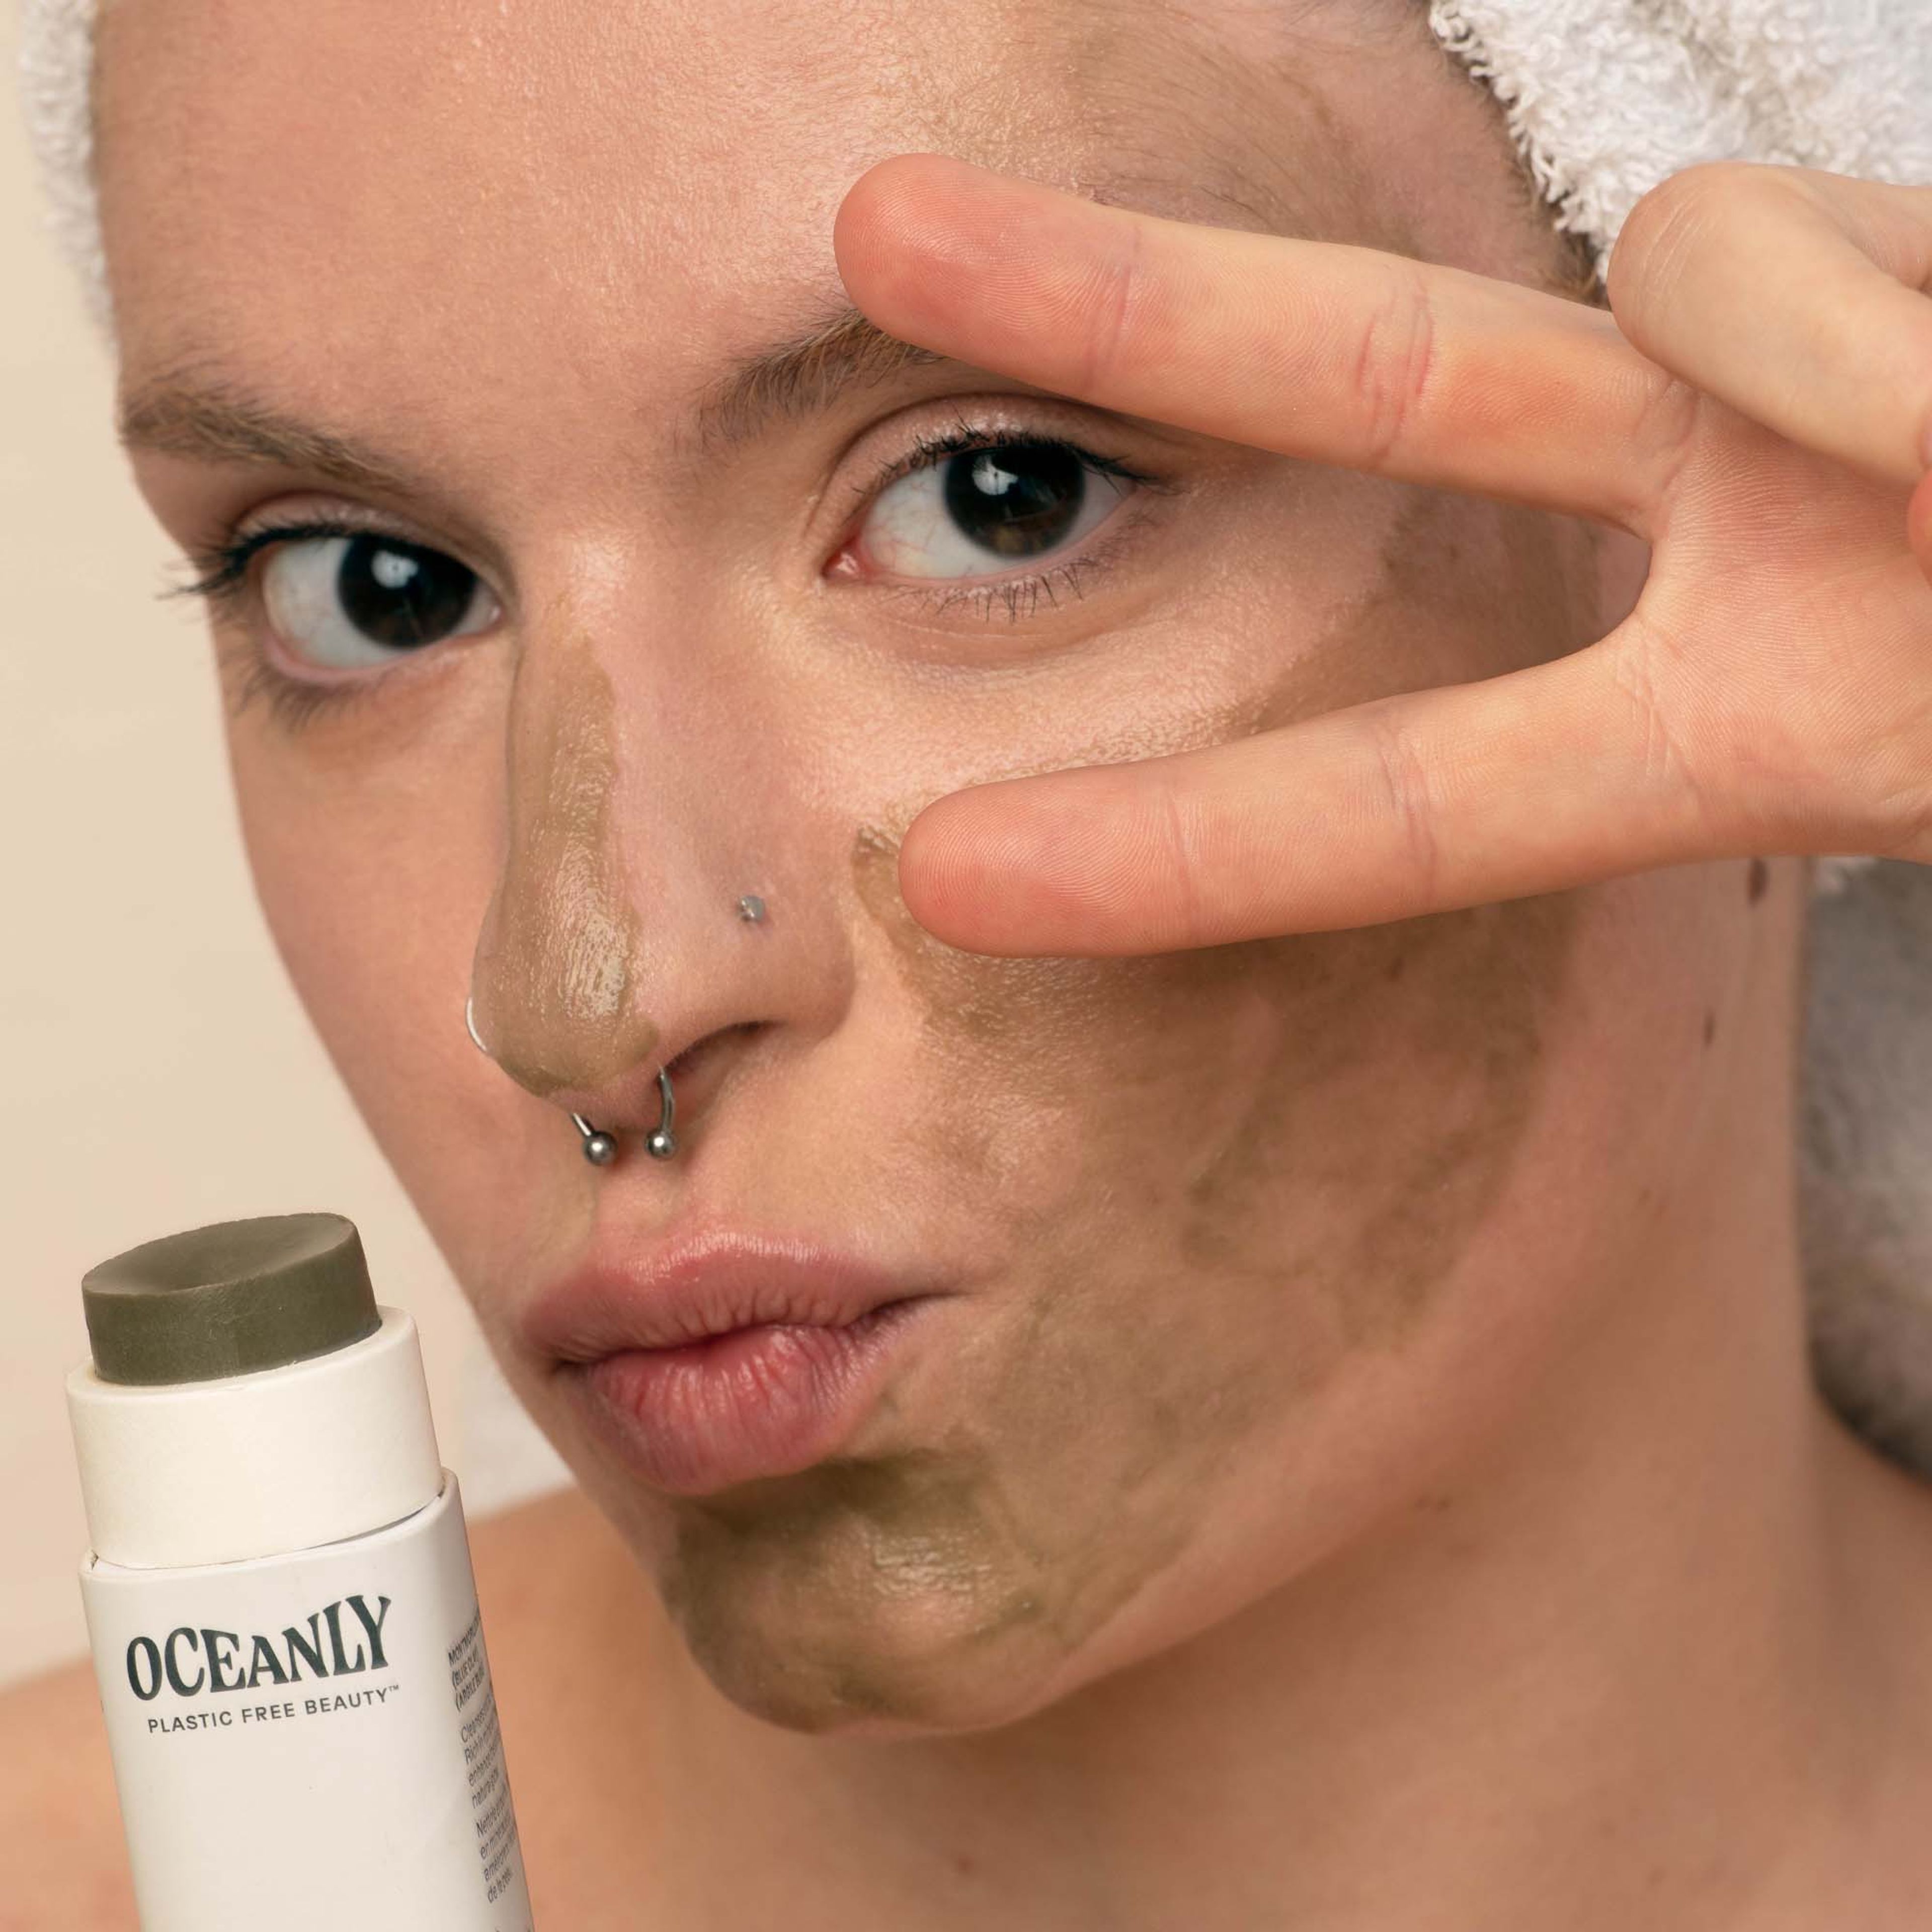 Purifying Solid Mask with Blue Clay : Oceanly - Phyto-Cleanse